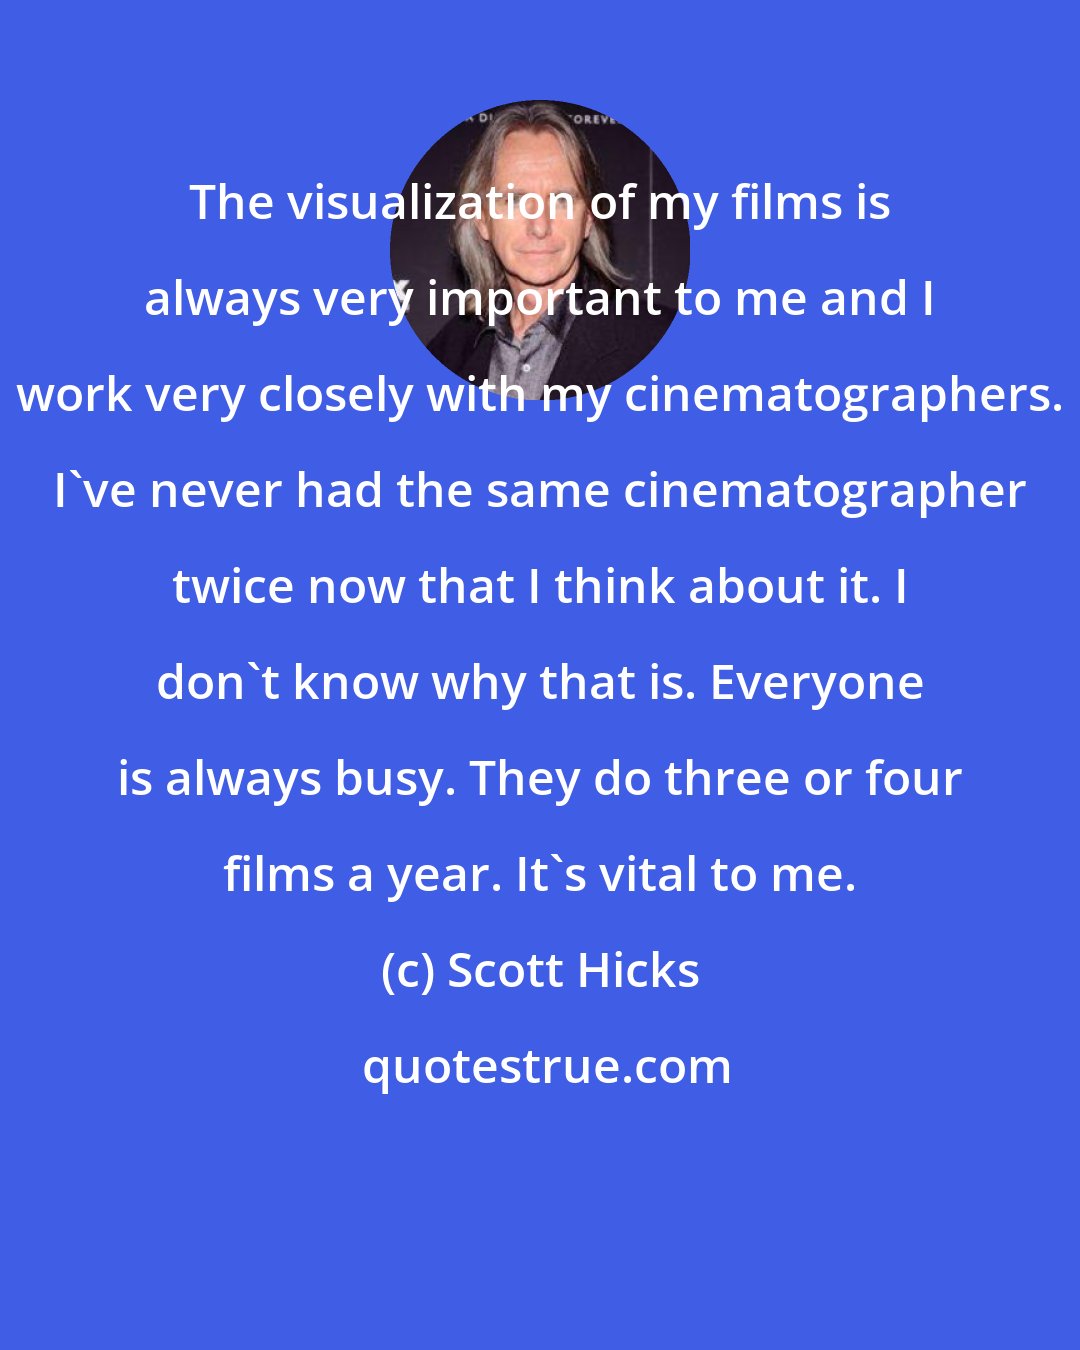 Scott Hicks: The visualization of my films is always very important to me and I work very closely with my cinematographers. I've never had the same cinematographer twice now that I think about it. I don't know why that is. Everyone is always busy. They do three or four films a year. It's vital to me.